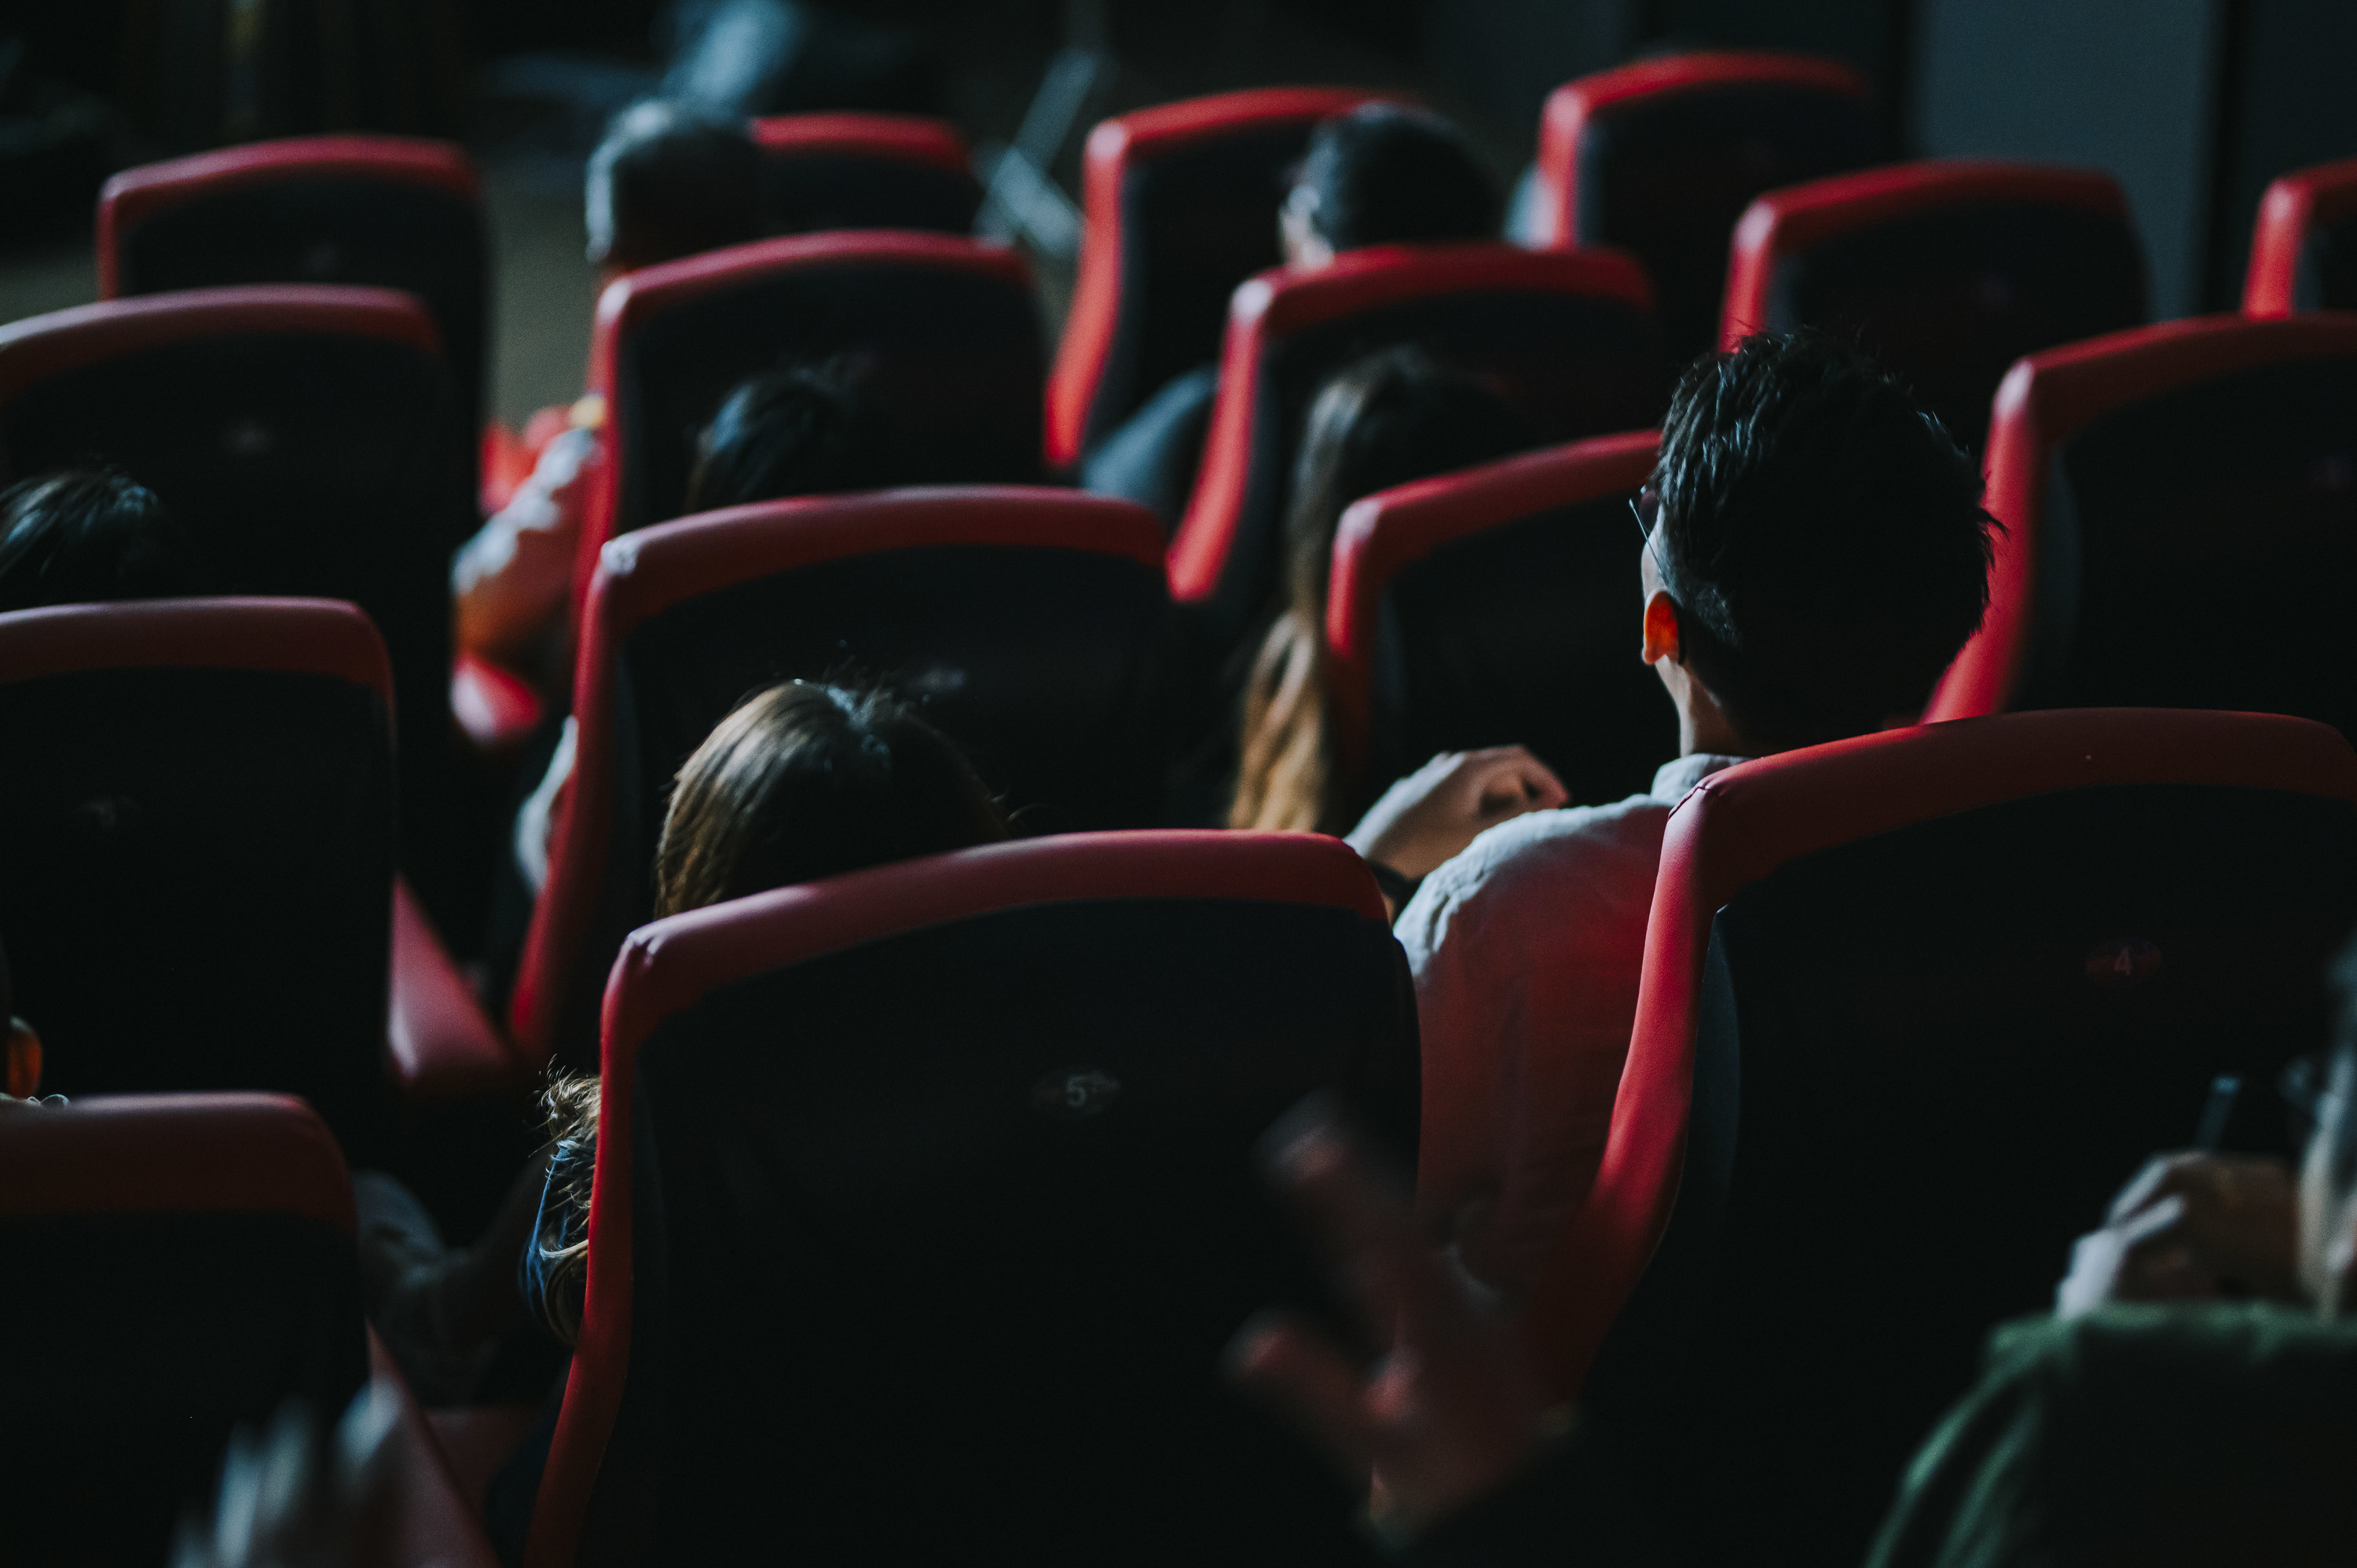 group of people in a theater watching a movie